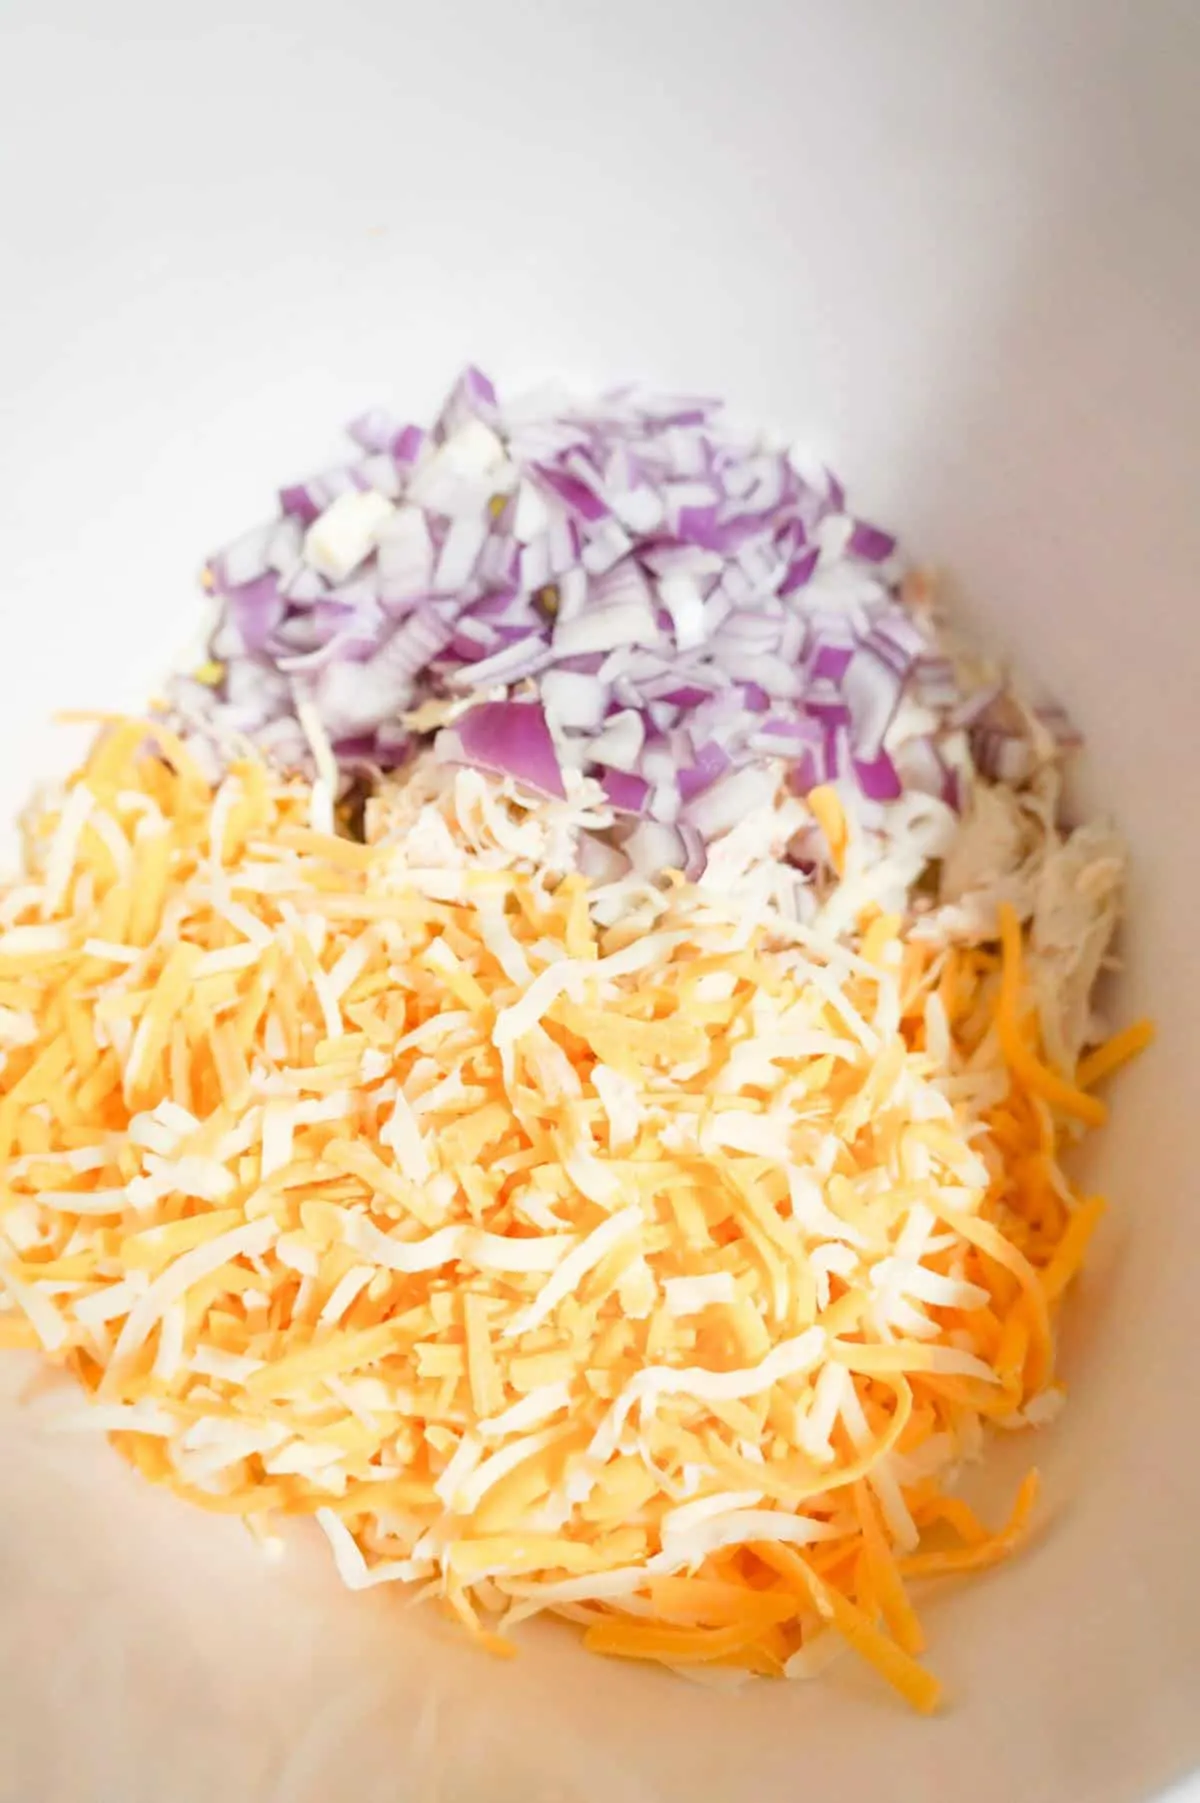 shredded cheese, diced red onion and shredded chicken in a mixing bowl